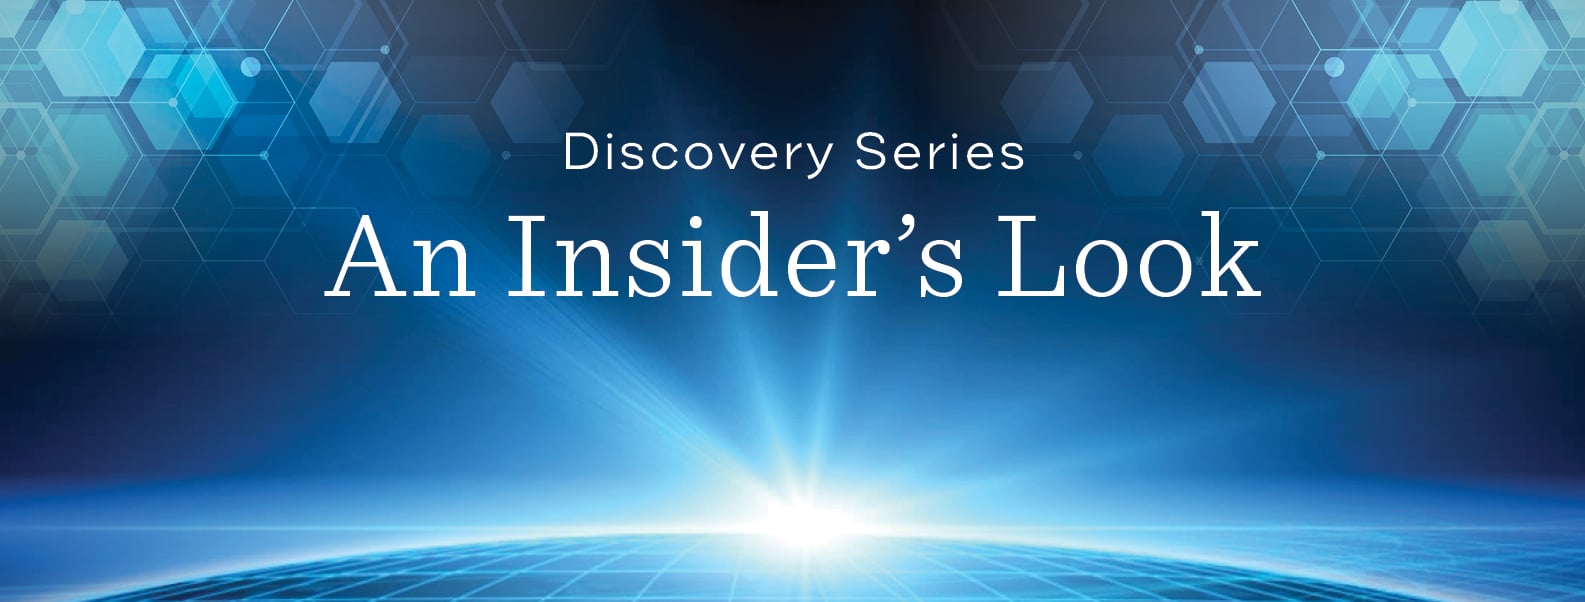 Discovery Series: An Insider's Look